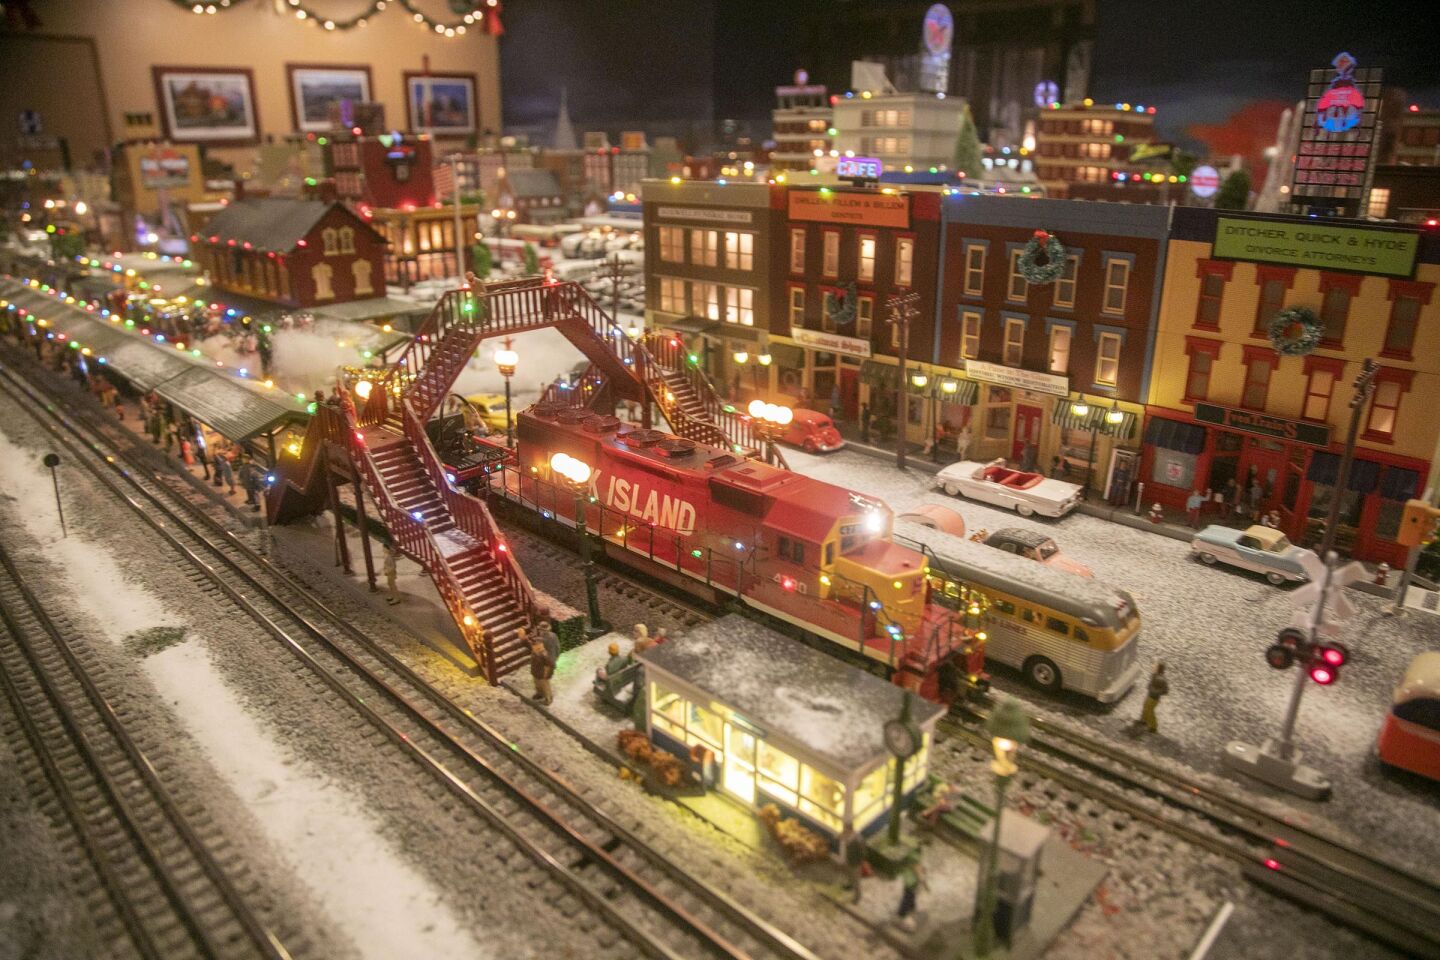 David Lizerbram and his wife Mana Monzavi took over the Old Town Model Railroad Depot, which was in danger of closing. The extensive train layout and its detailed and sometimes humorous dioramas was photographed on Friday, Dec. 13, 2019, at its Old Town, San Diego location. One of the trains making its way through town.